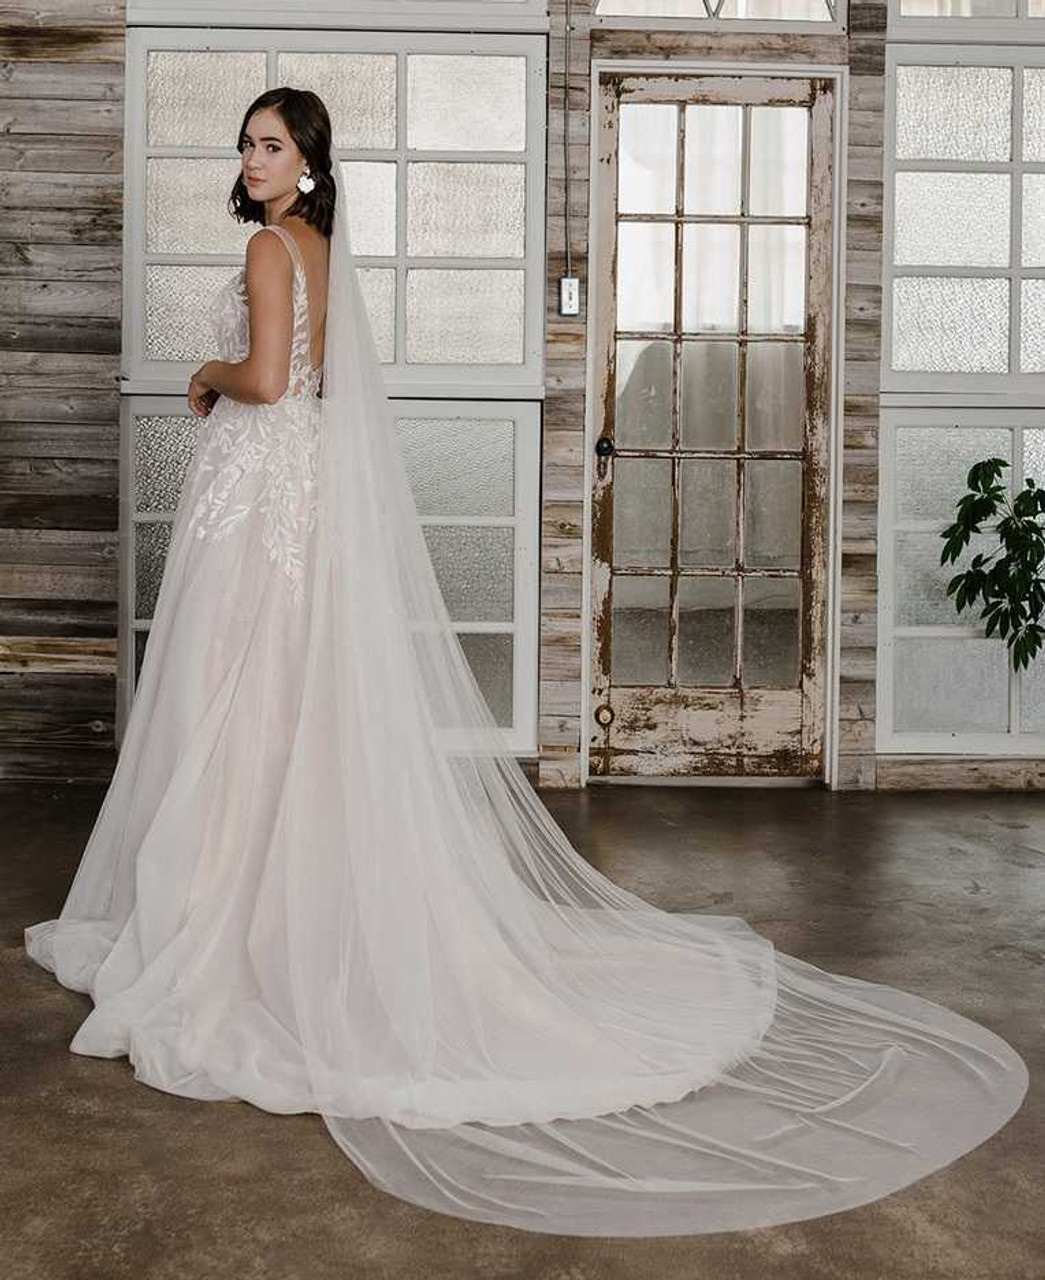 https://cdn11.bigcommerce.com/s-zb3qt33o/images/stencil/1280x1280/products/19481/60593/Soft-English-Luxe-Tulle-Cathedral-Wedding-Veil-Envogue-V2103C_51385__24731.1689392585.jpg?c=2